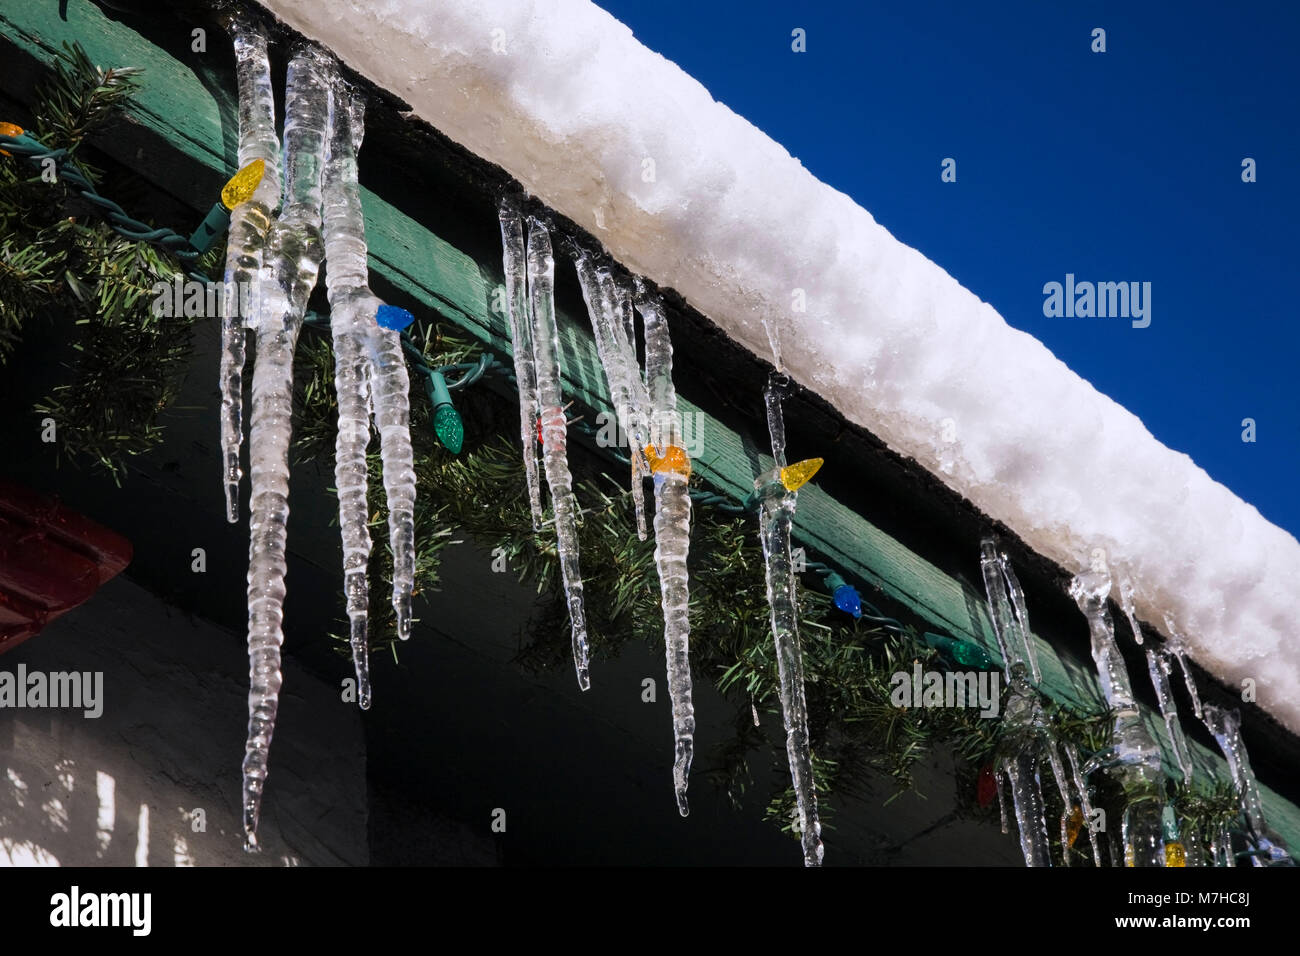 Snow And Ice With Christmas Lights And Icicles Hanging From The Eaves Stock Photo Alamy